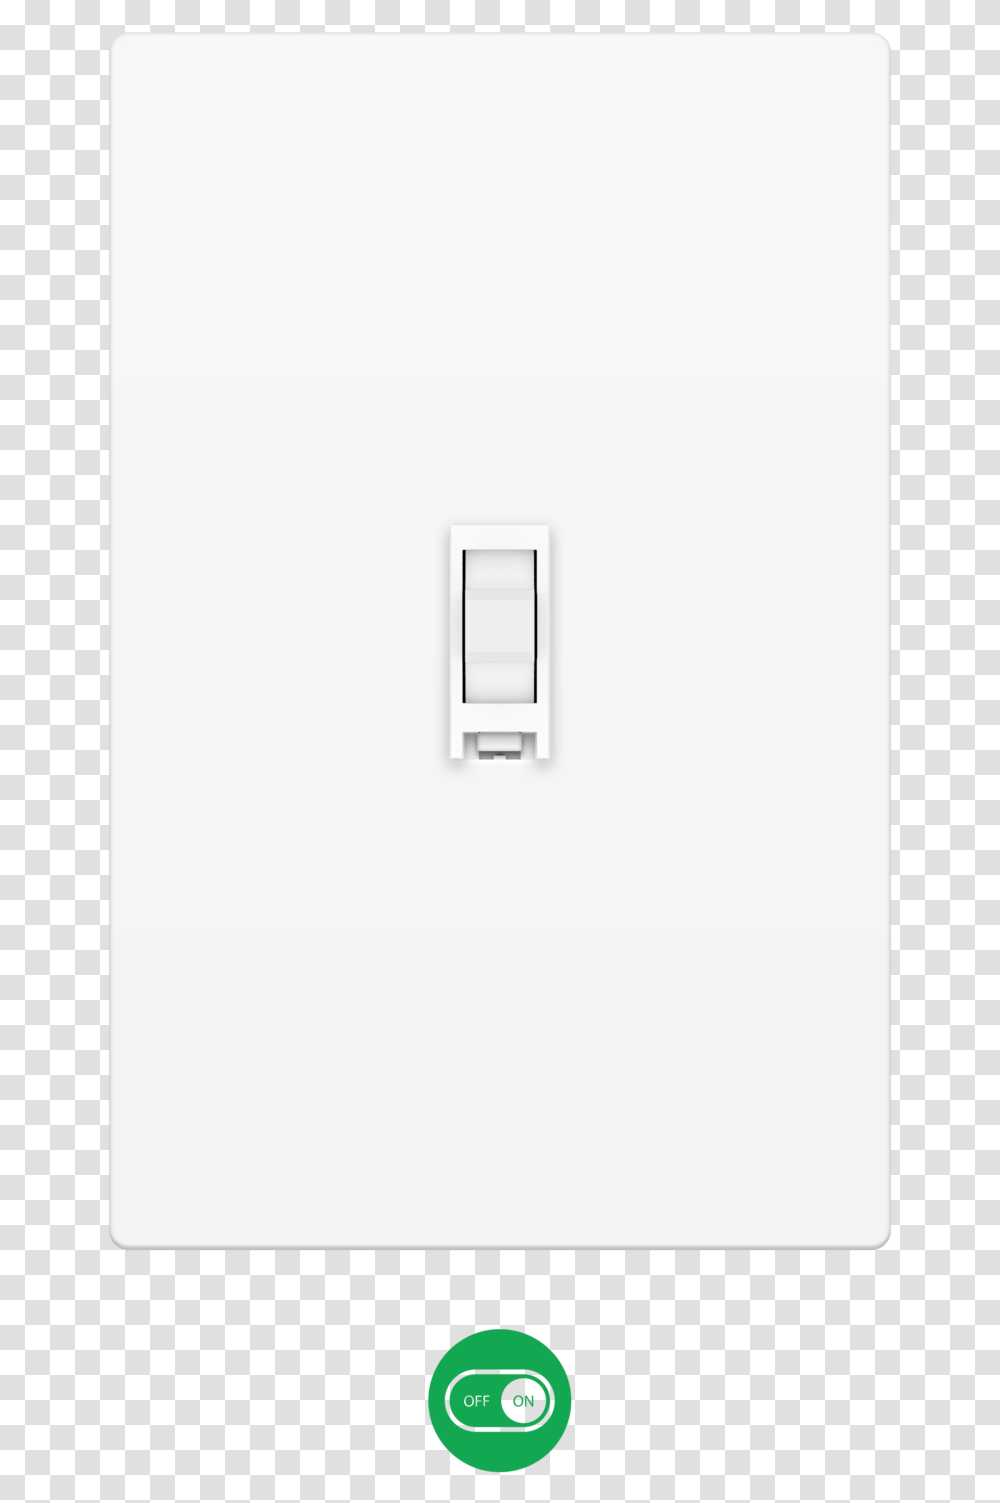 Toggle Switch On Off Electronics, Electrical Device, Word Transparent Png